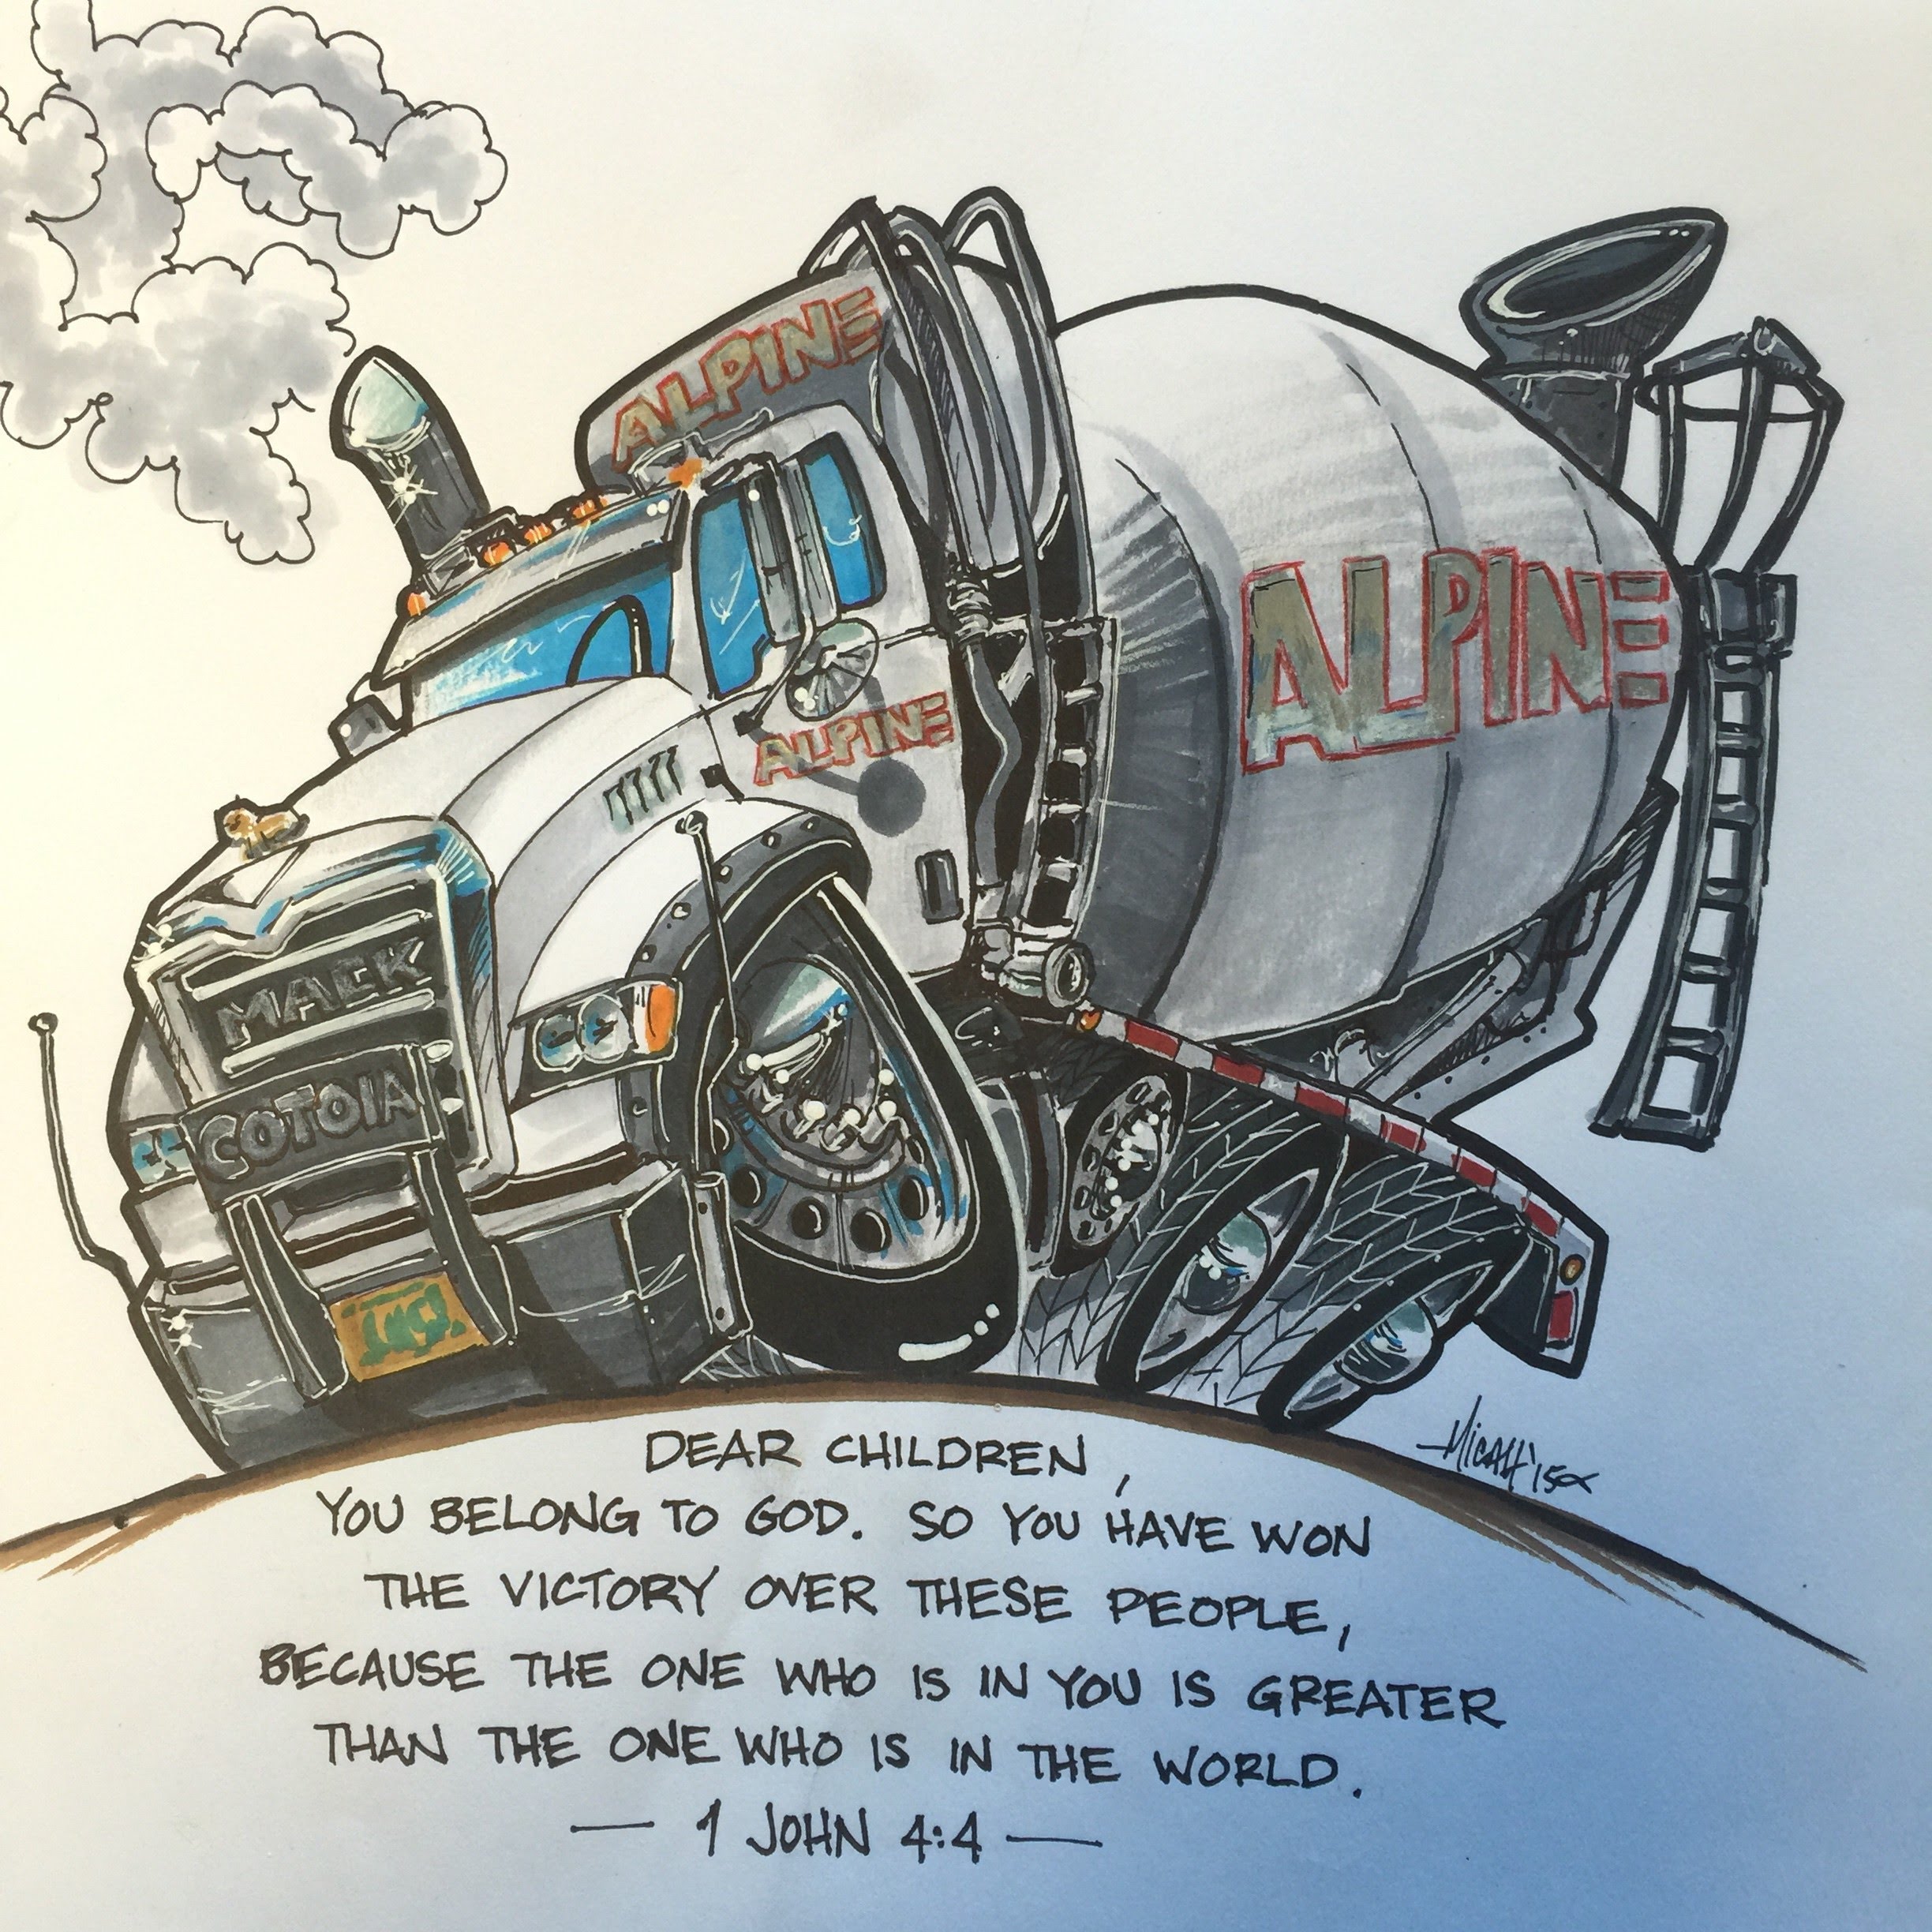 Cement Truck Drawing at GetDrawings Free download